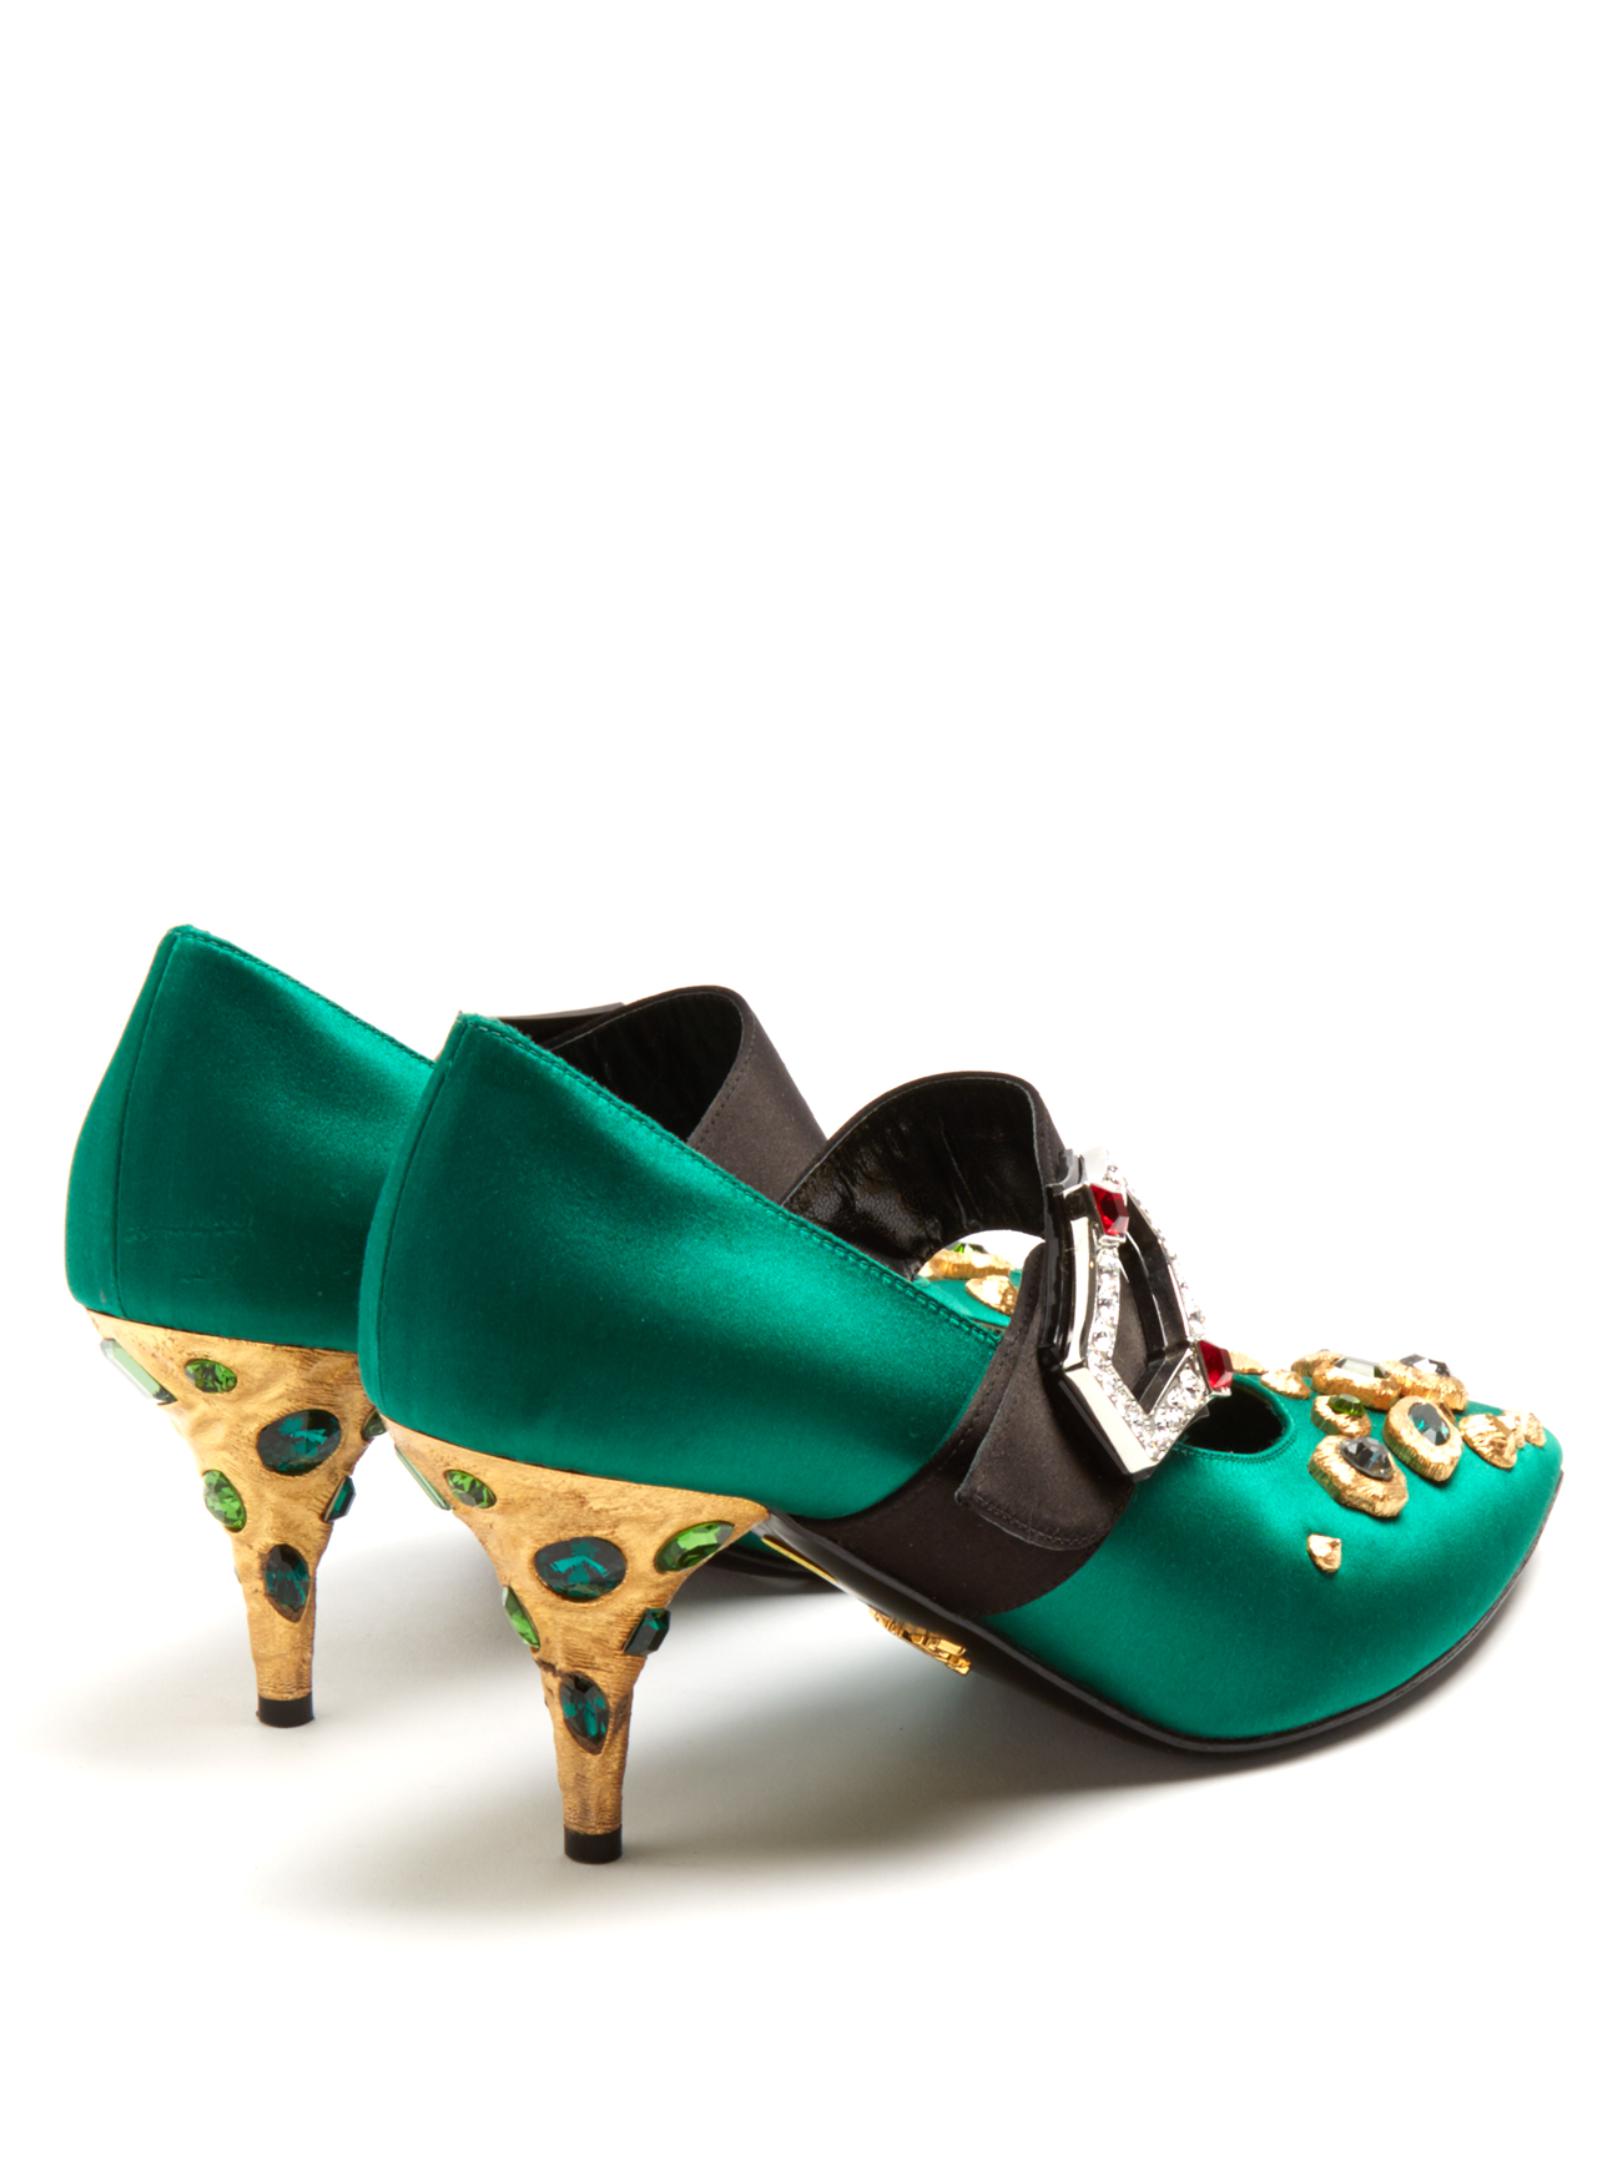 Prada Embellished Point-toe Satin Pumps in Green - Lyst